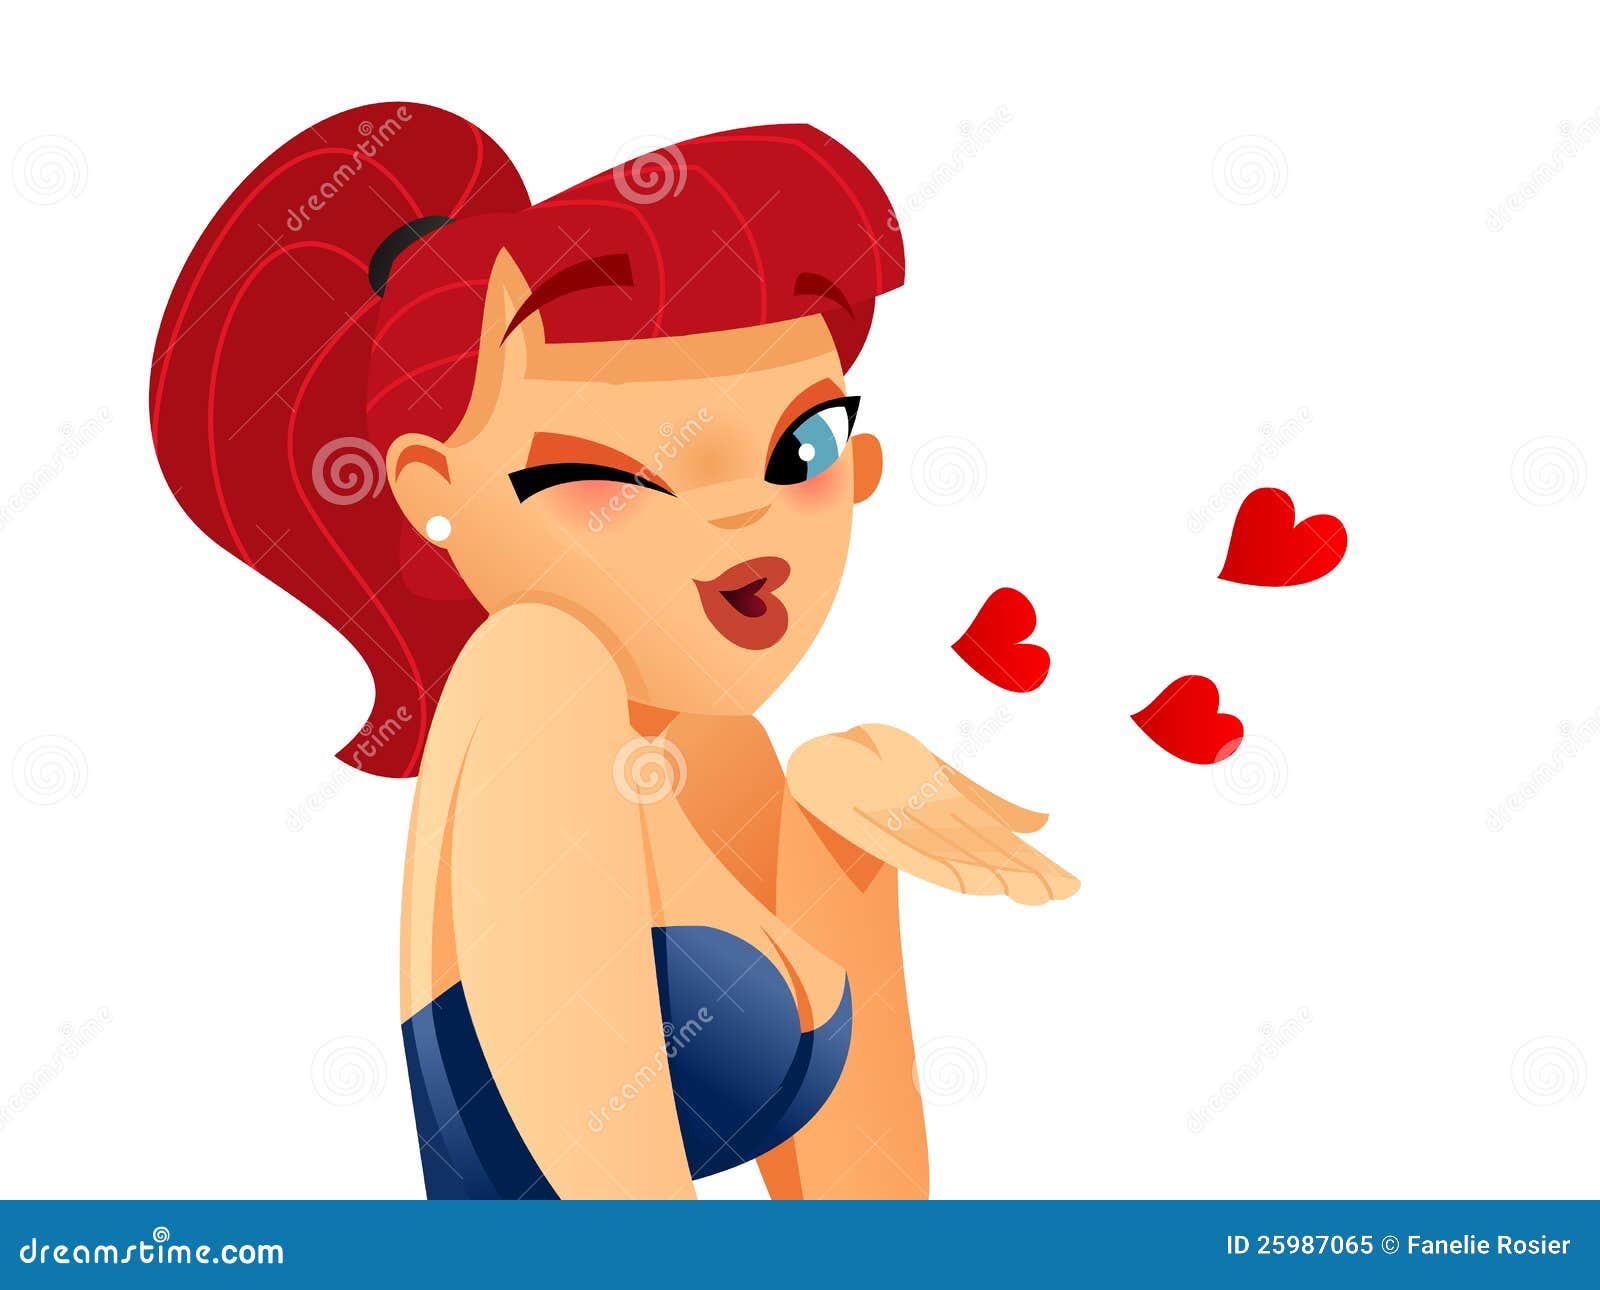 free animated kisses clipart - photo #33